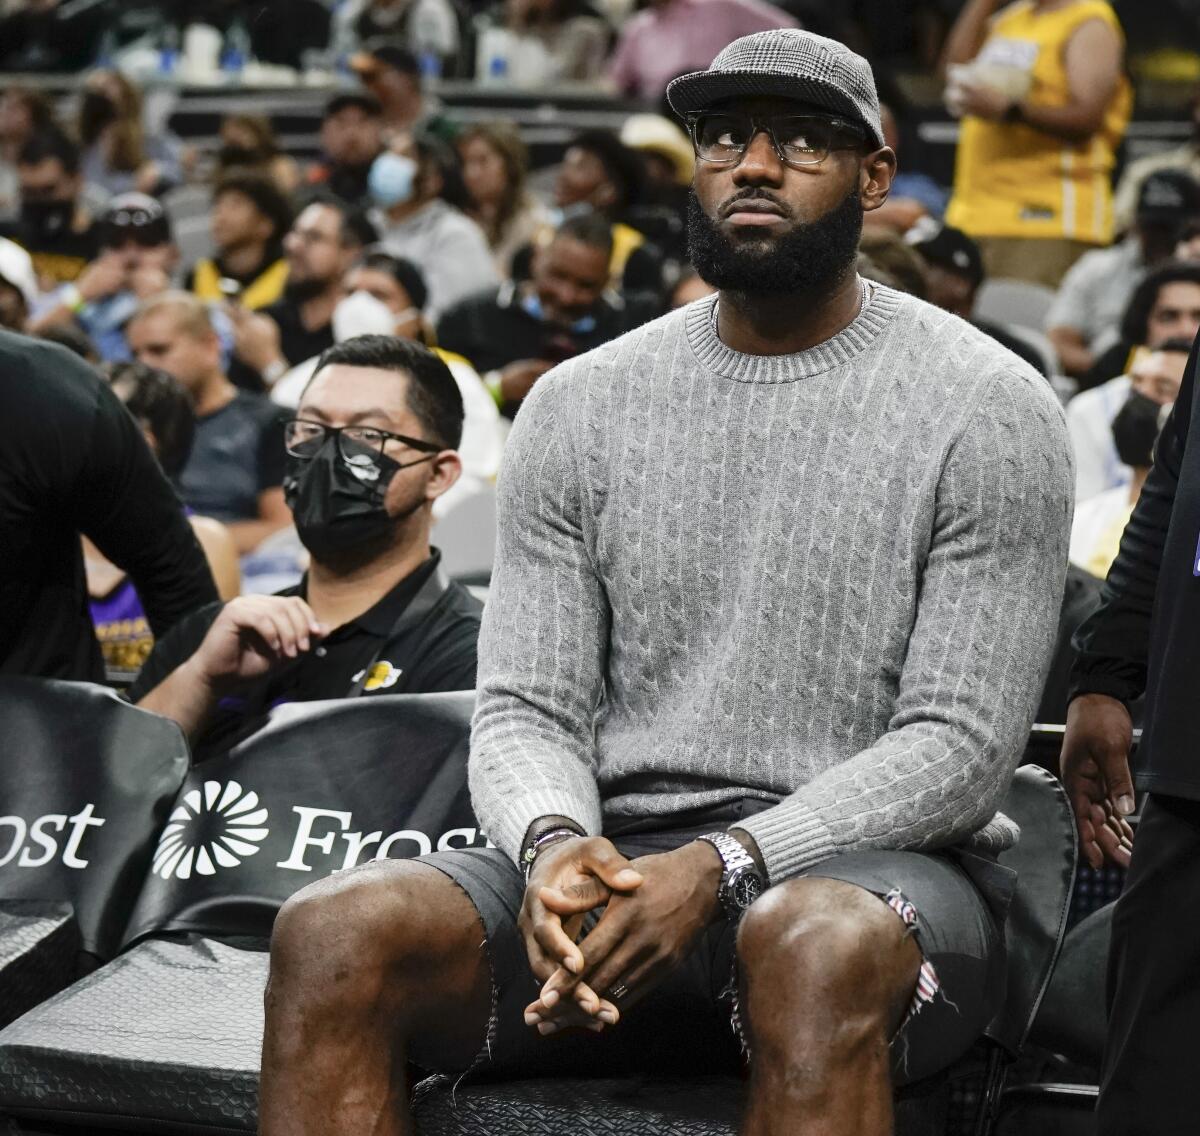 Lakers forward LeBron James sits on the bench in street clothes during a game against the San Antonio Spurs 